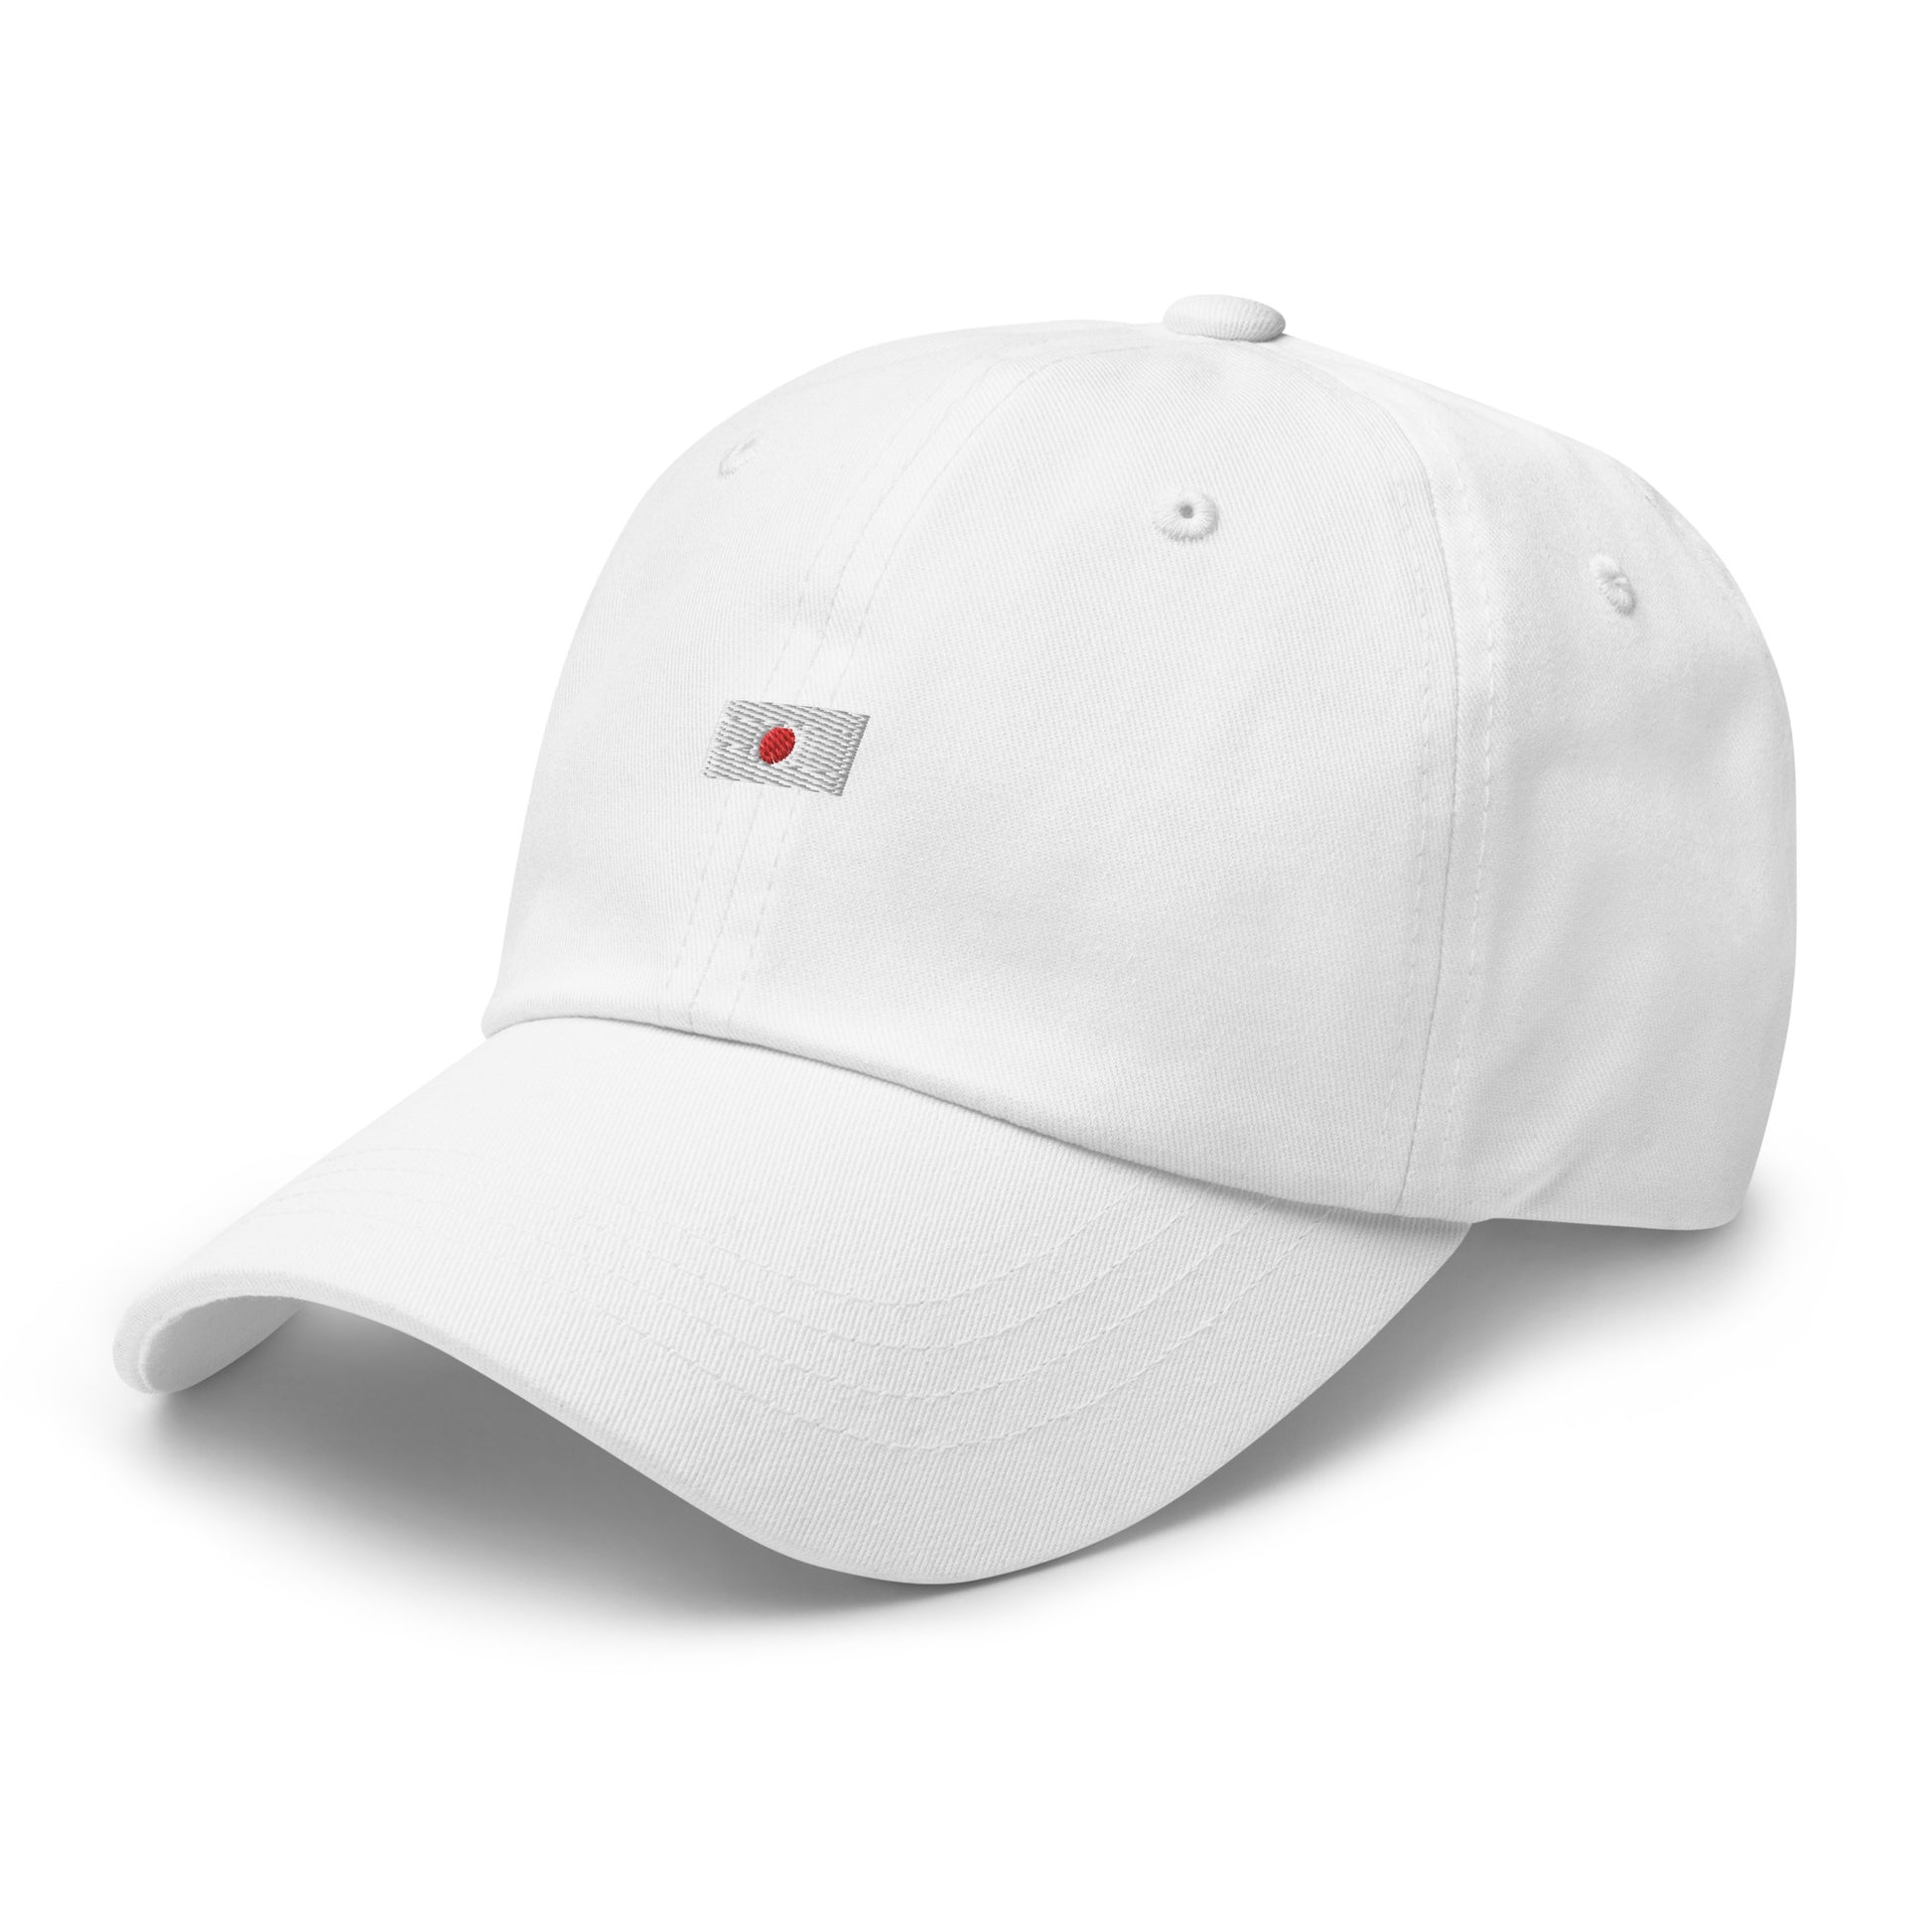 cap-from-the-front-with-japanese-flag